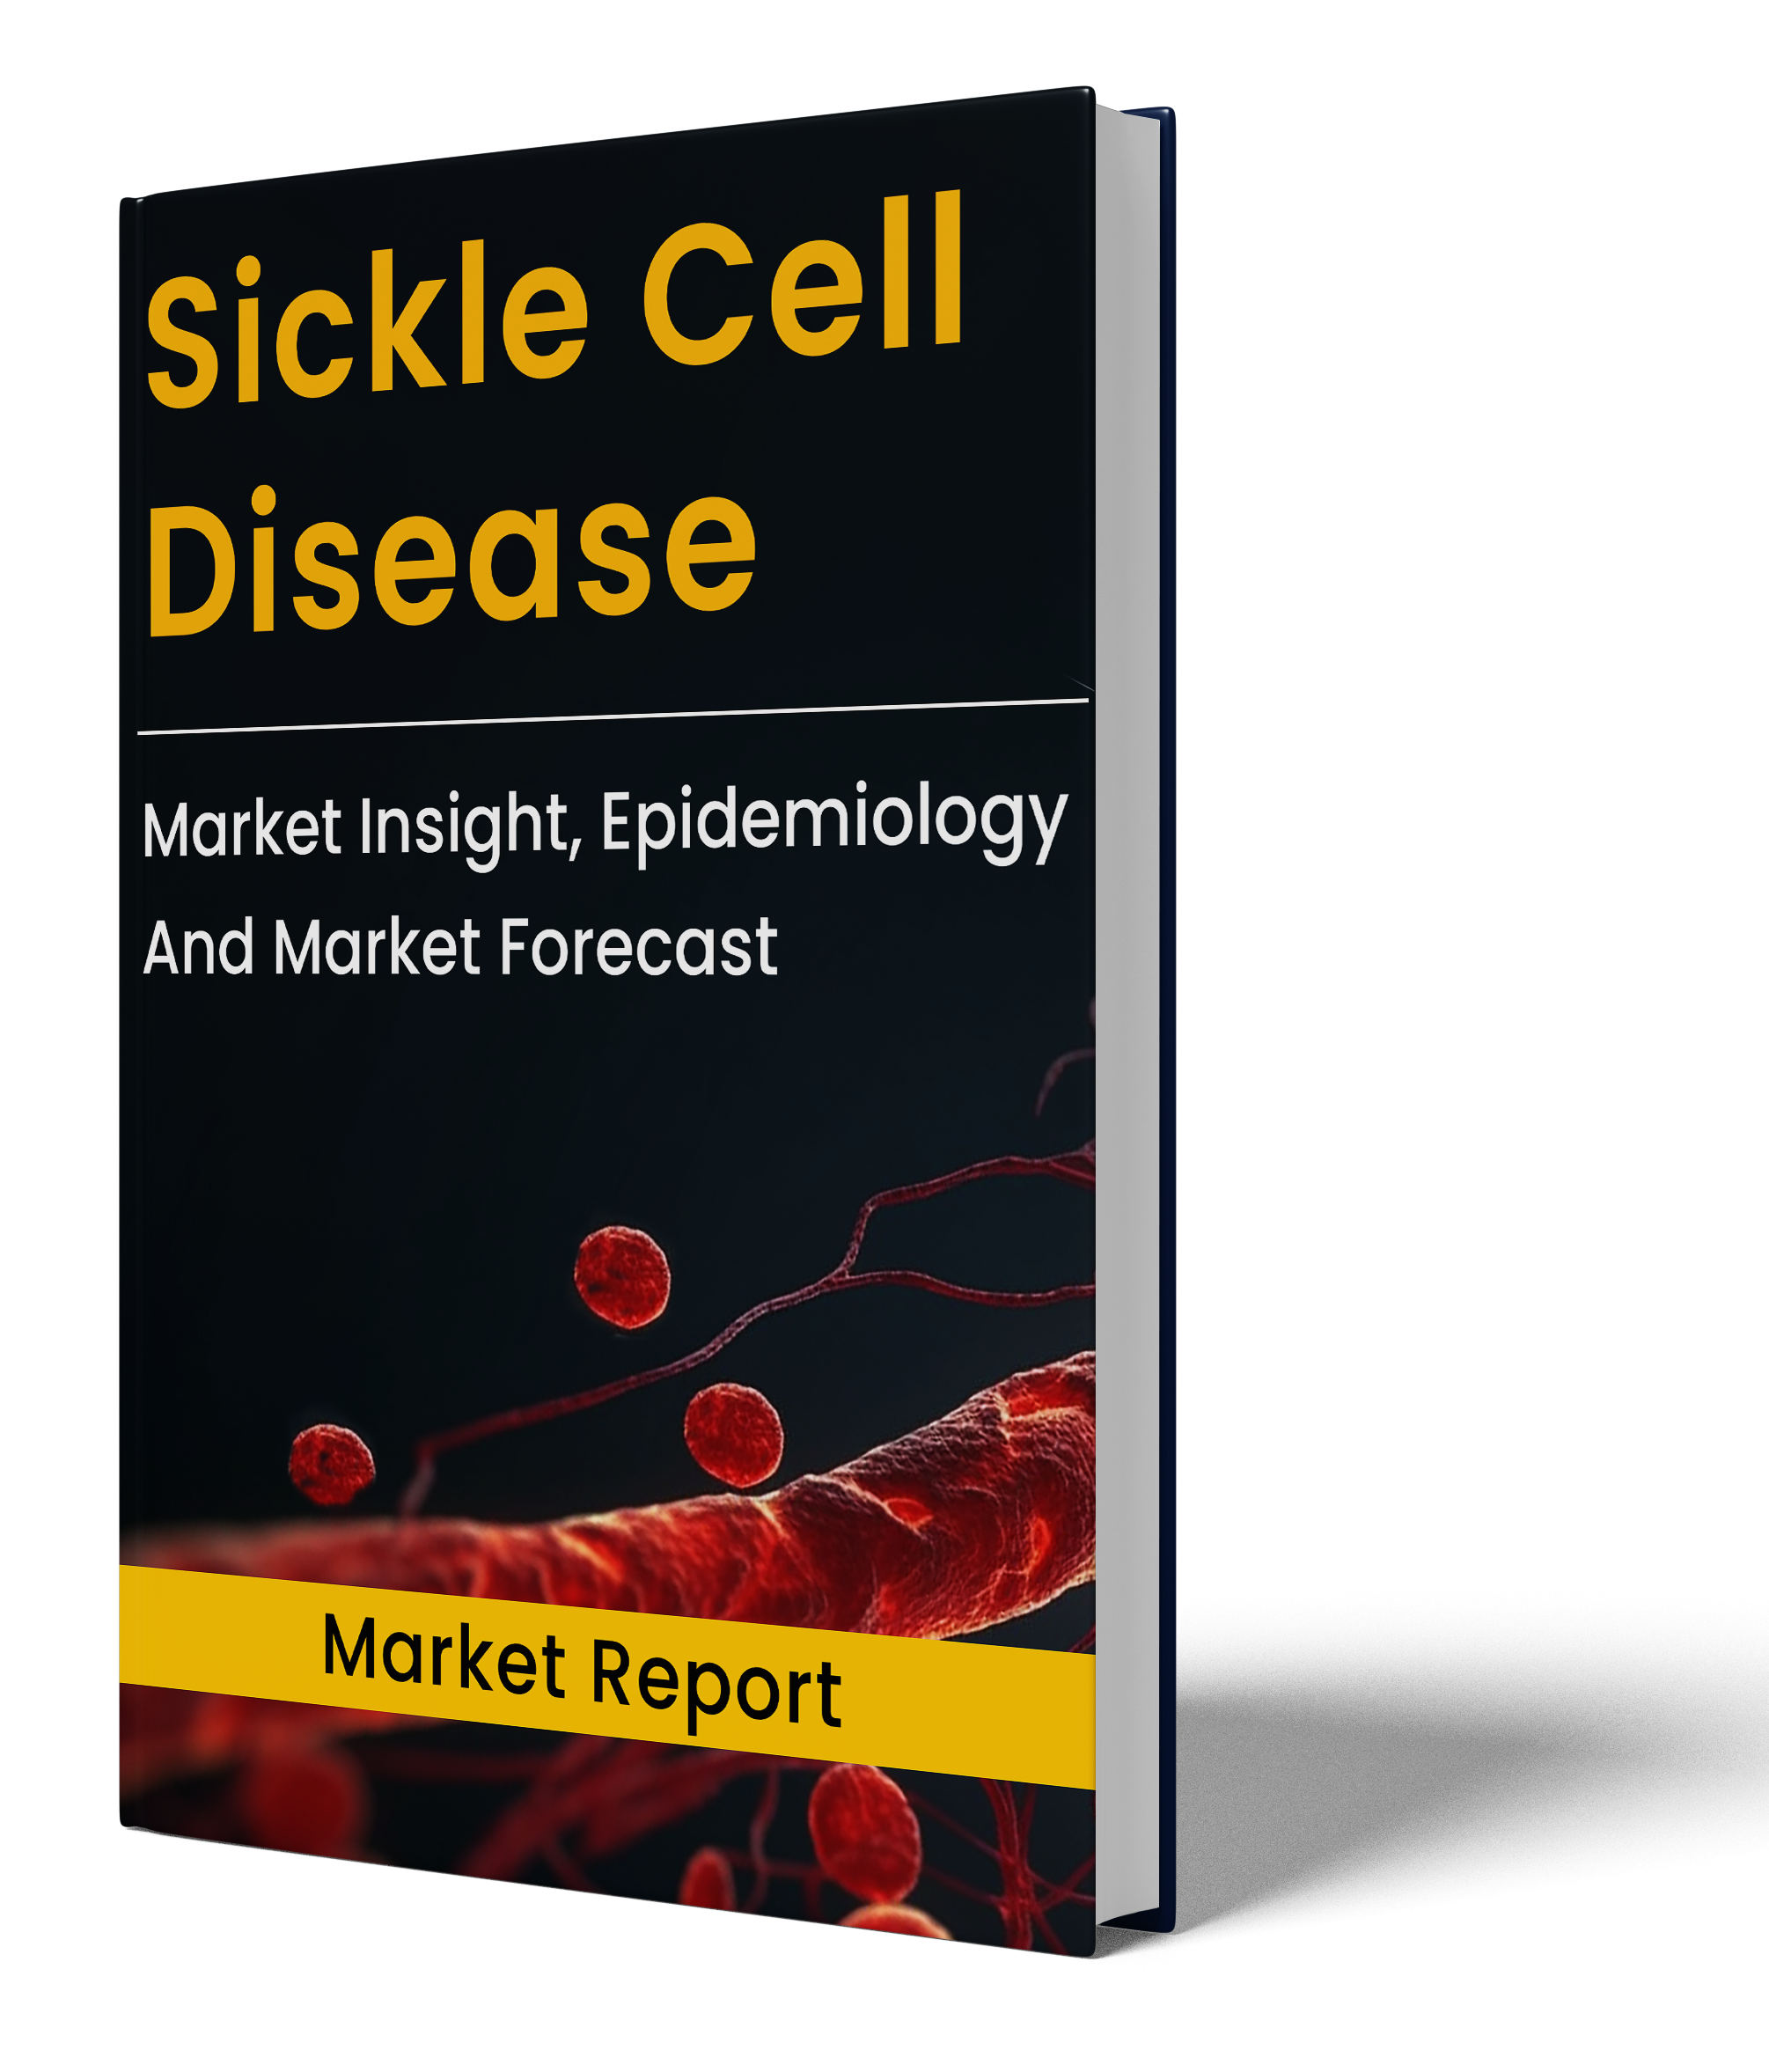 Sickle Cell Disease Market Report